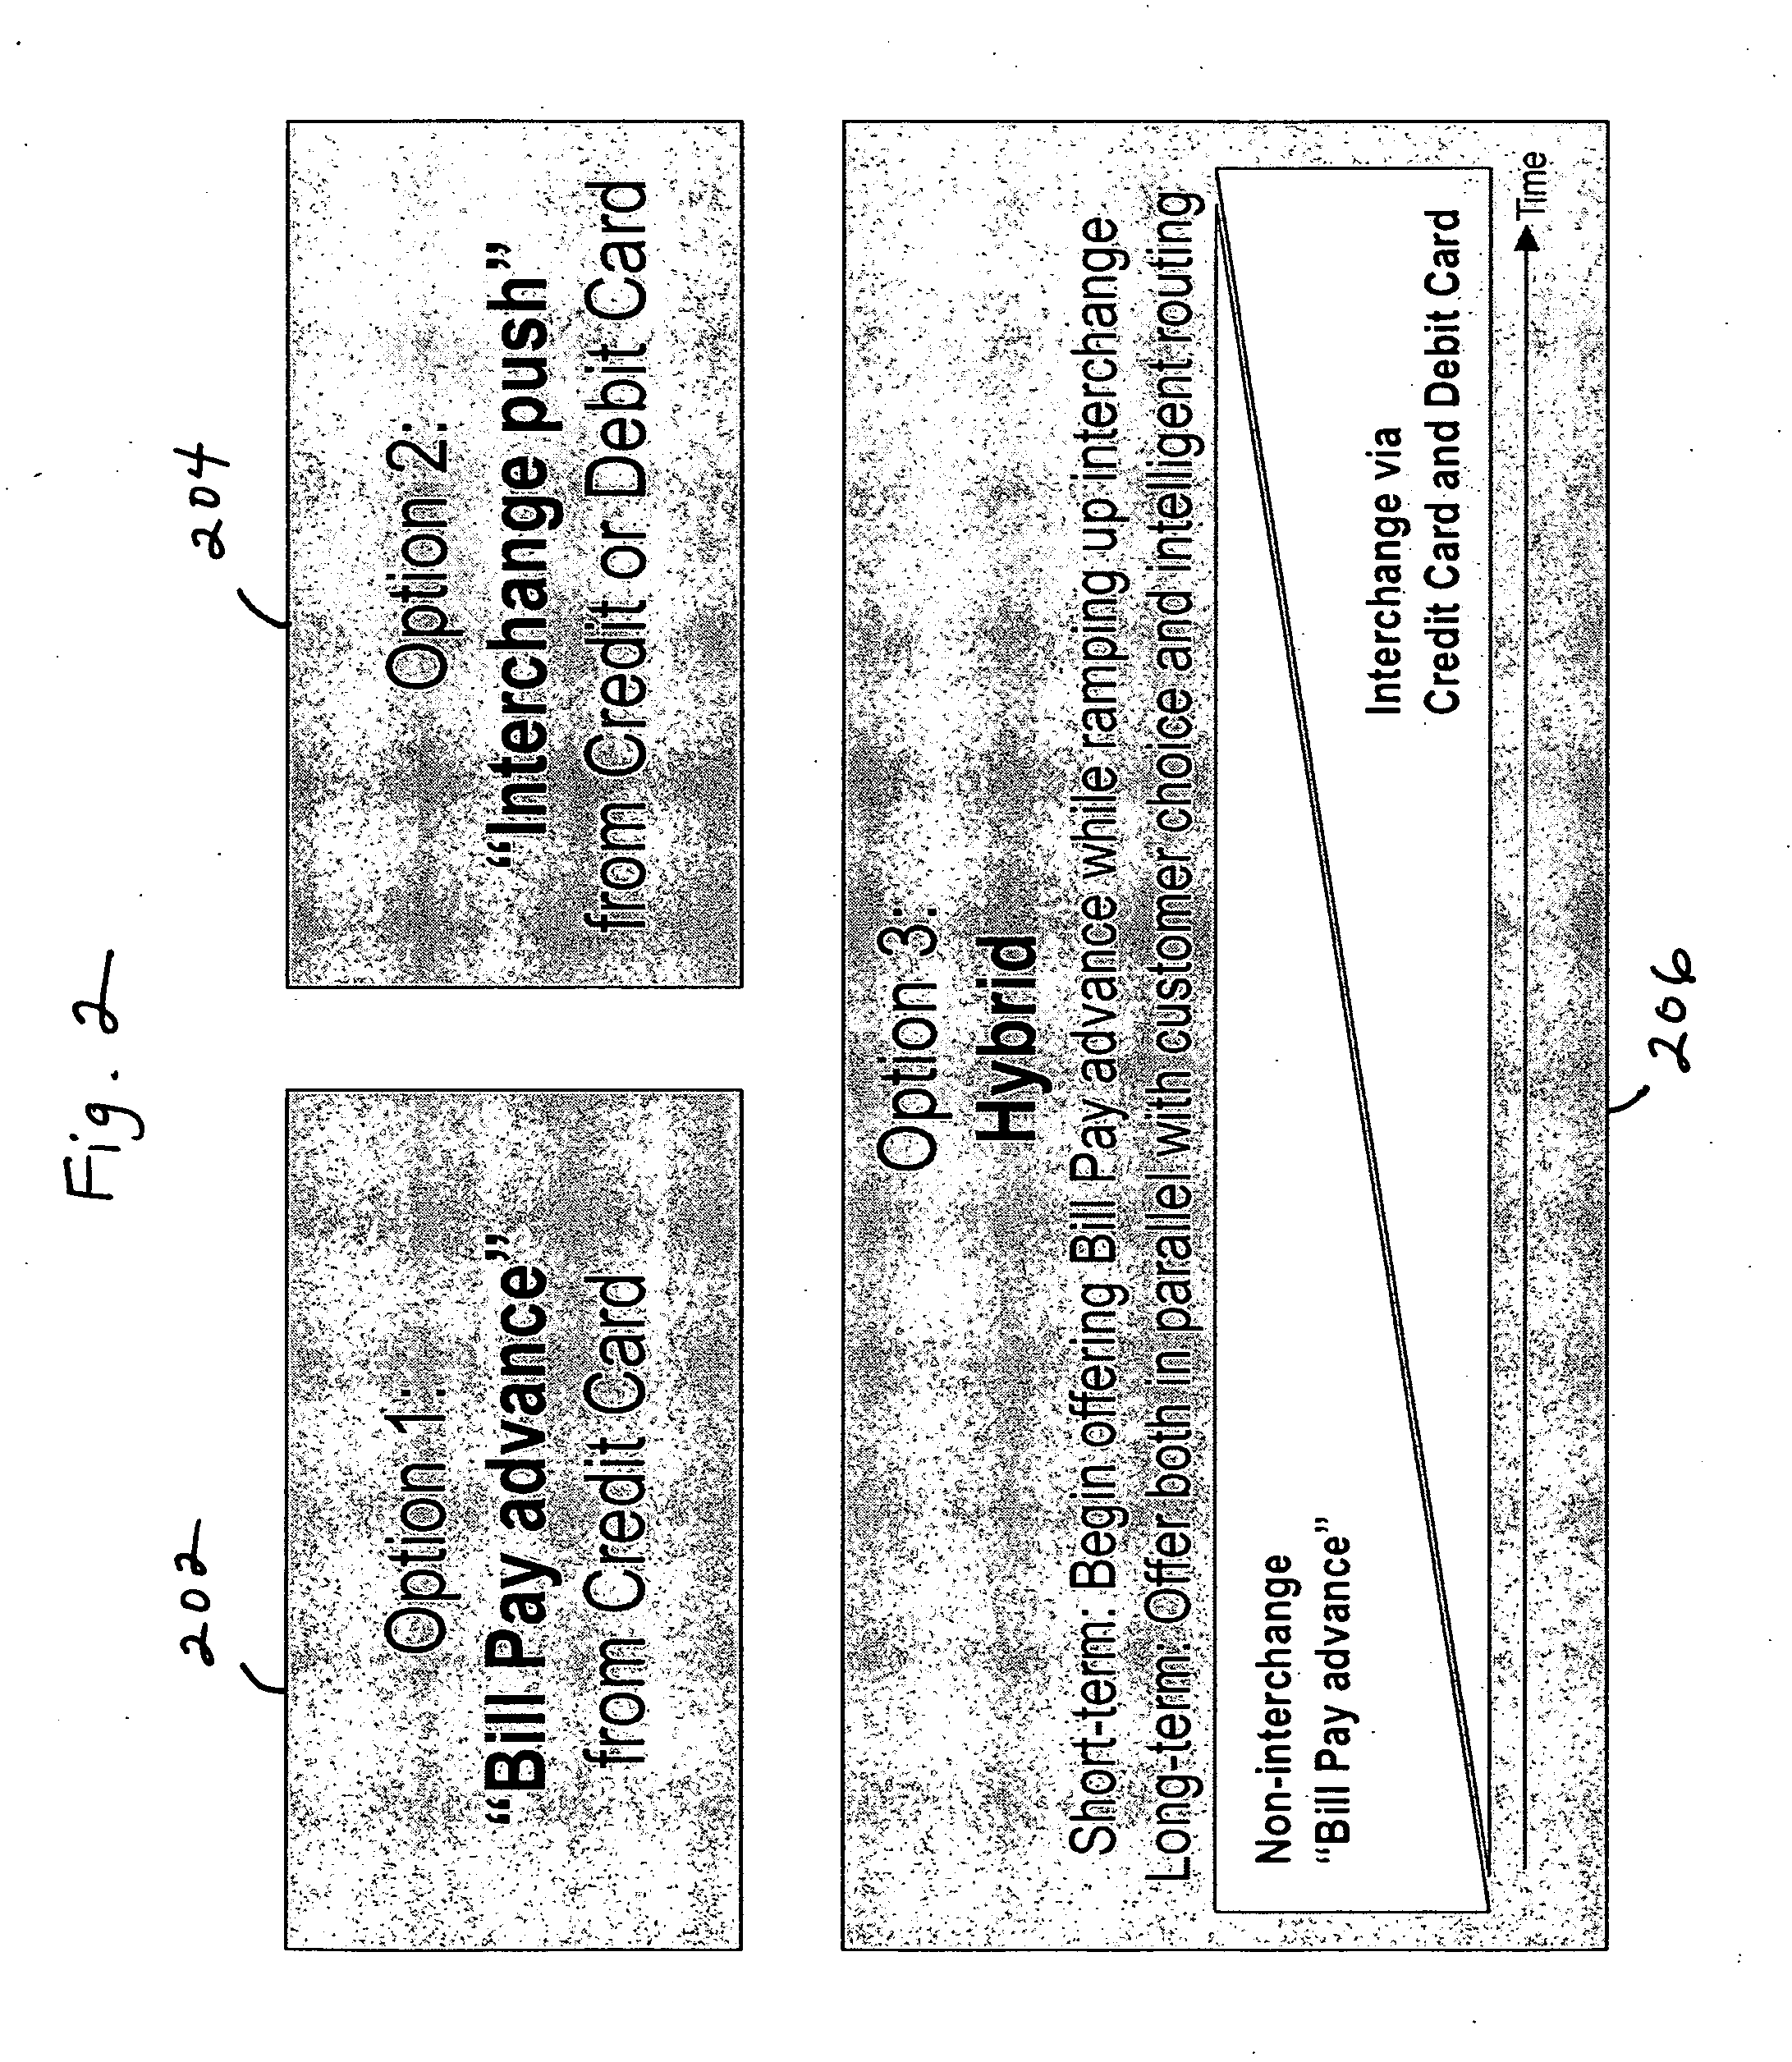 System and method for bill pay with credit card funding